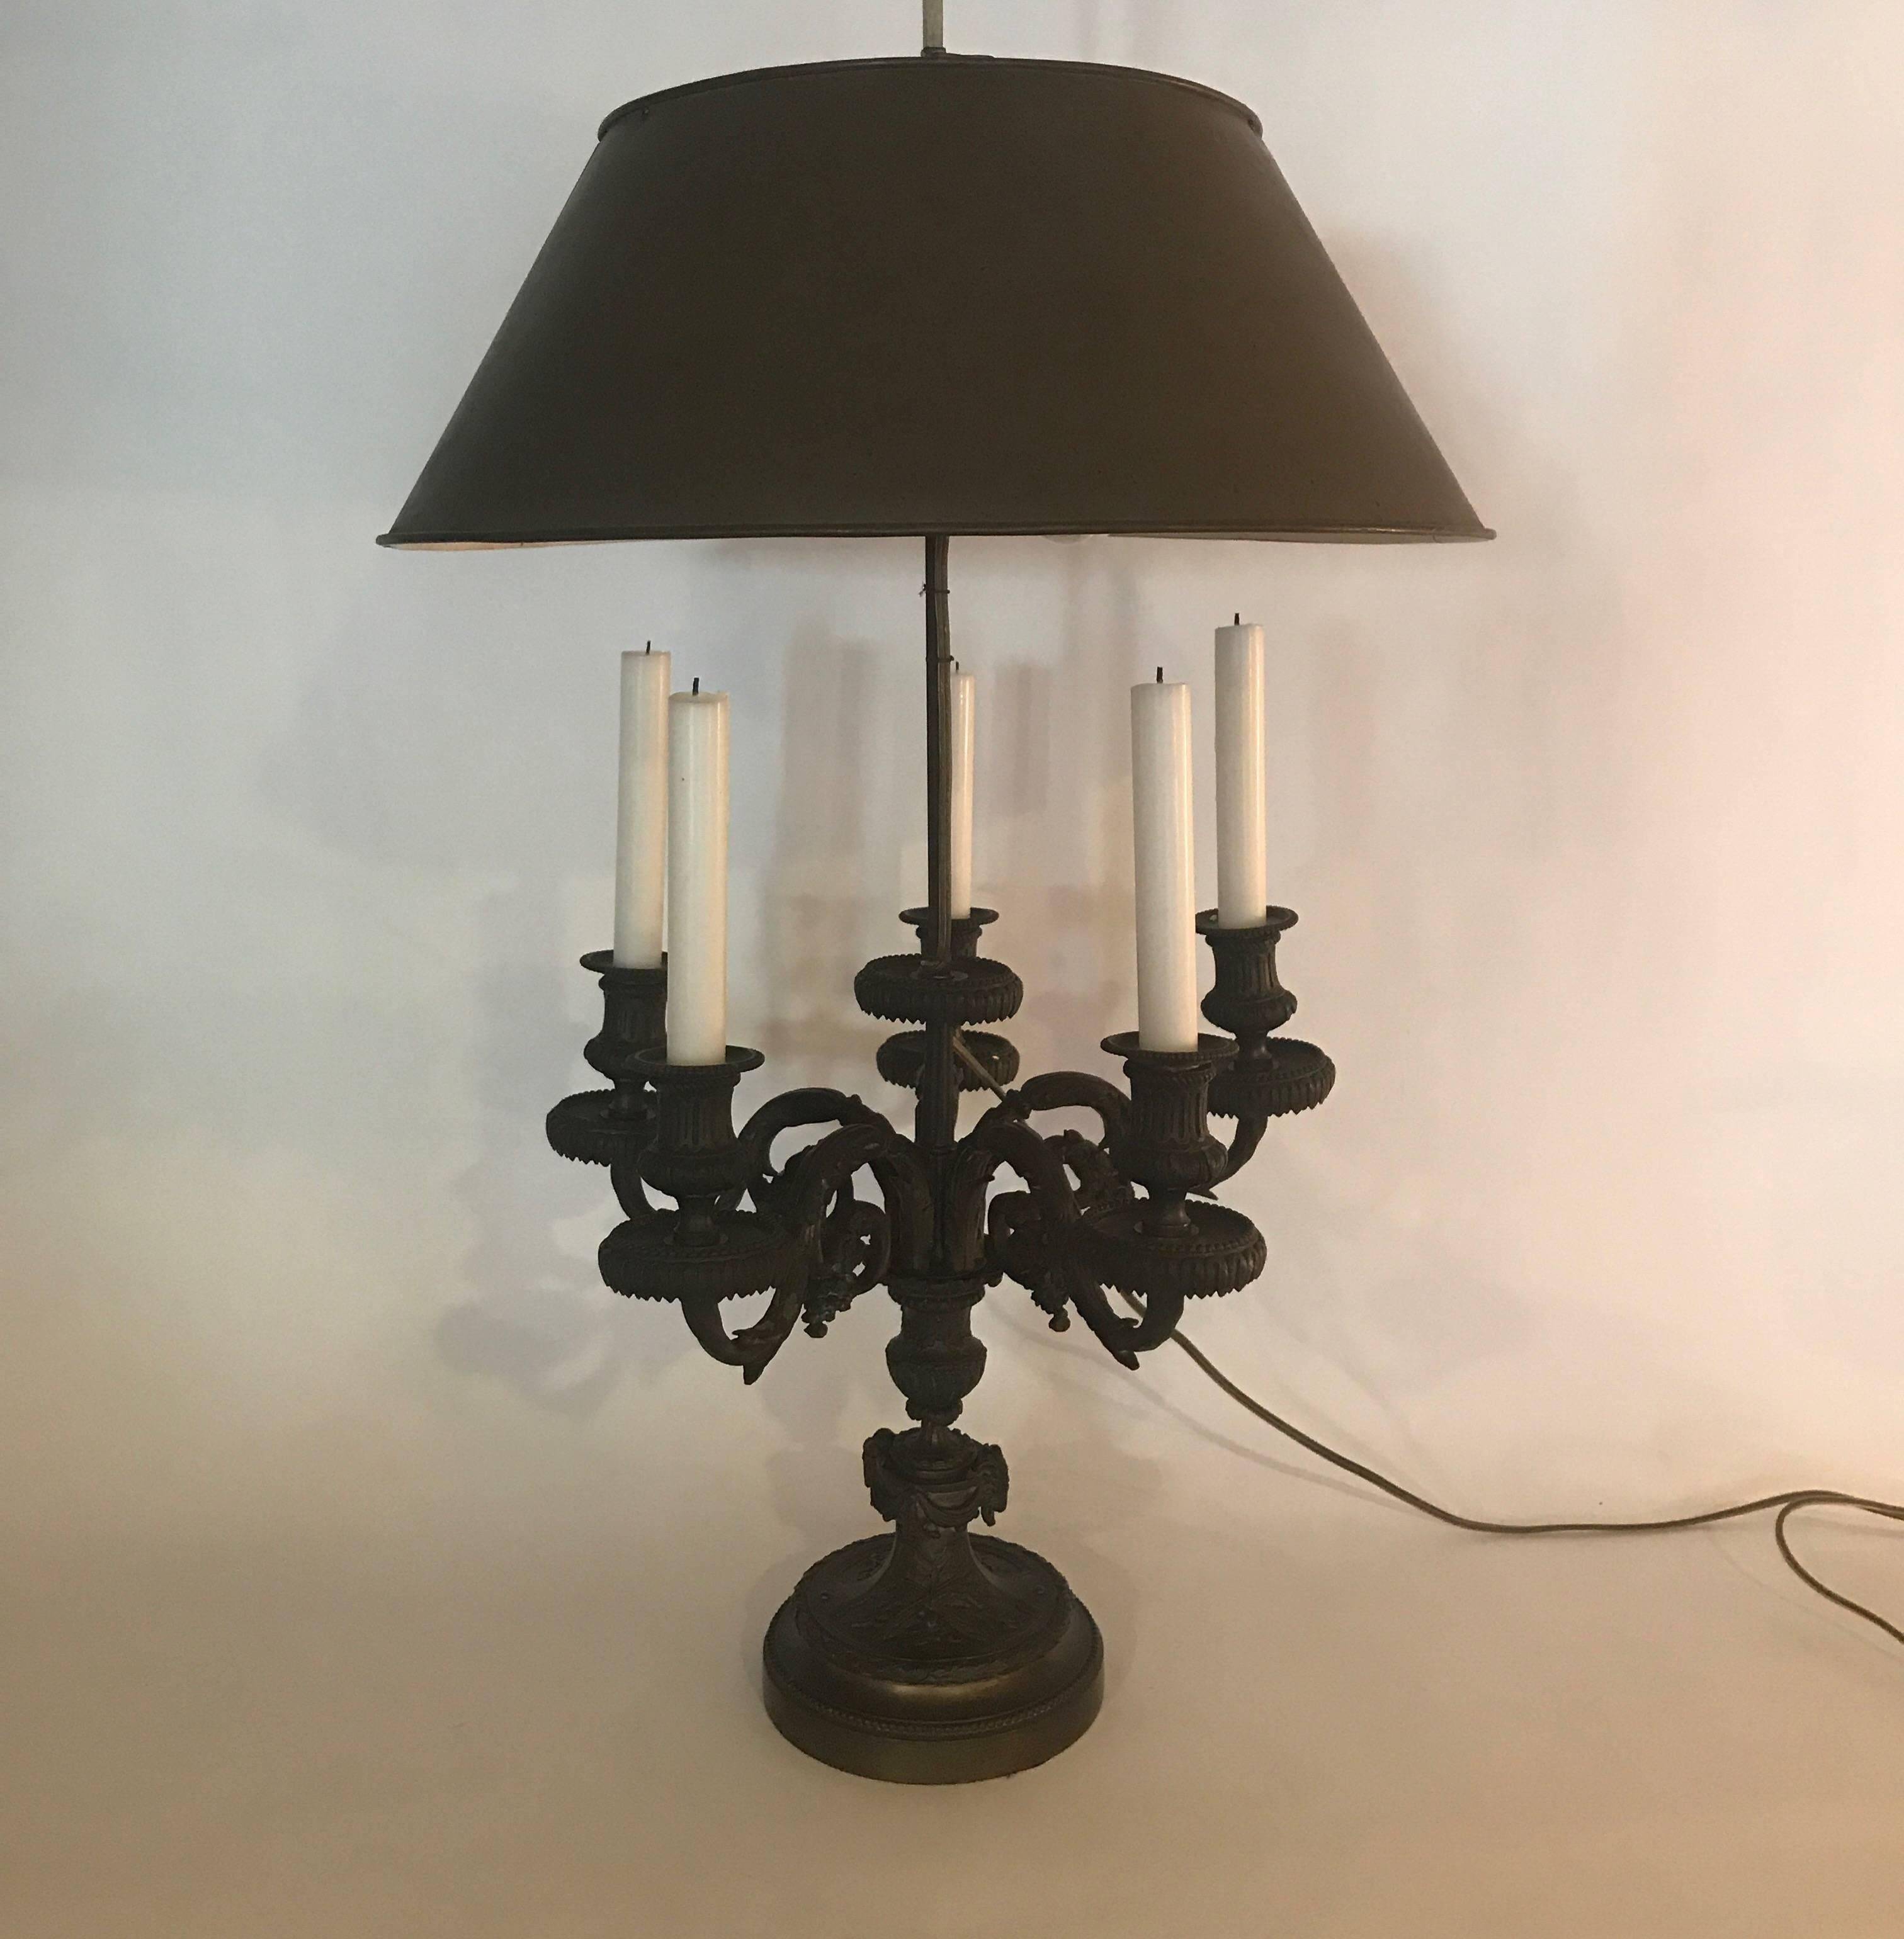 A patinated cast bronze bouillotte candelabra, now electrified. The finely cast details with five arms with the rod for the shade coming out the centre. The shade is finished to match the color of the base. The height to the top of the finial is 38